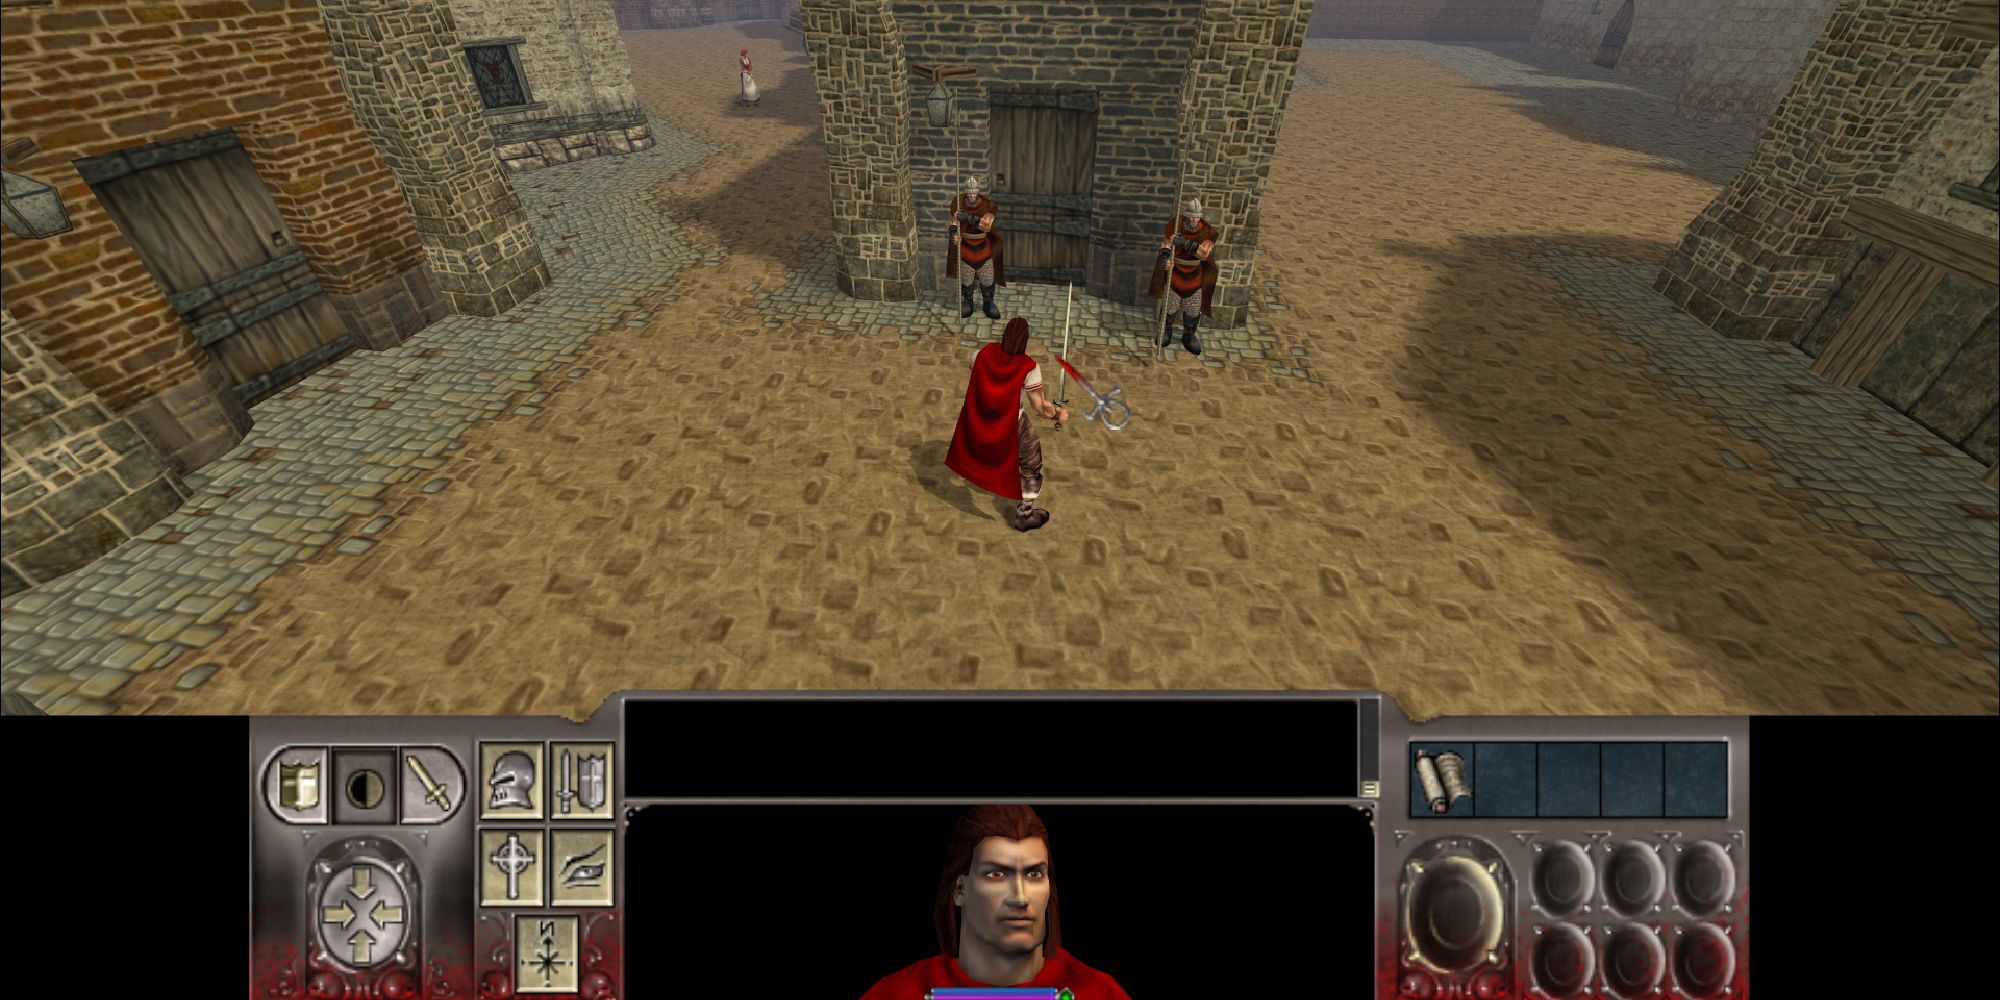 Main character Christof exploring a medieval looking village, standing outside a building flanked by guards in Vampire: the Masquerade - Redemption